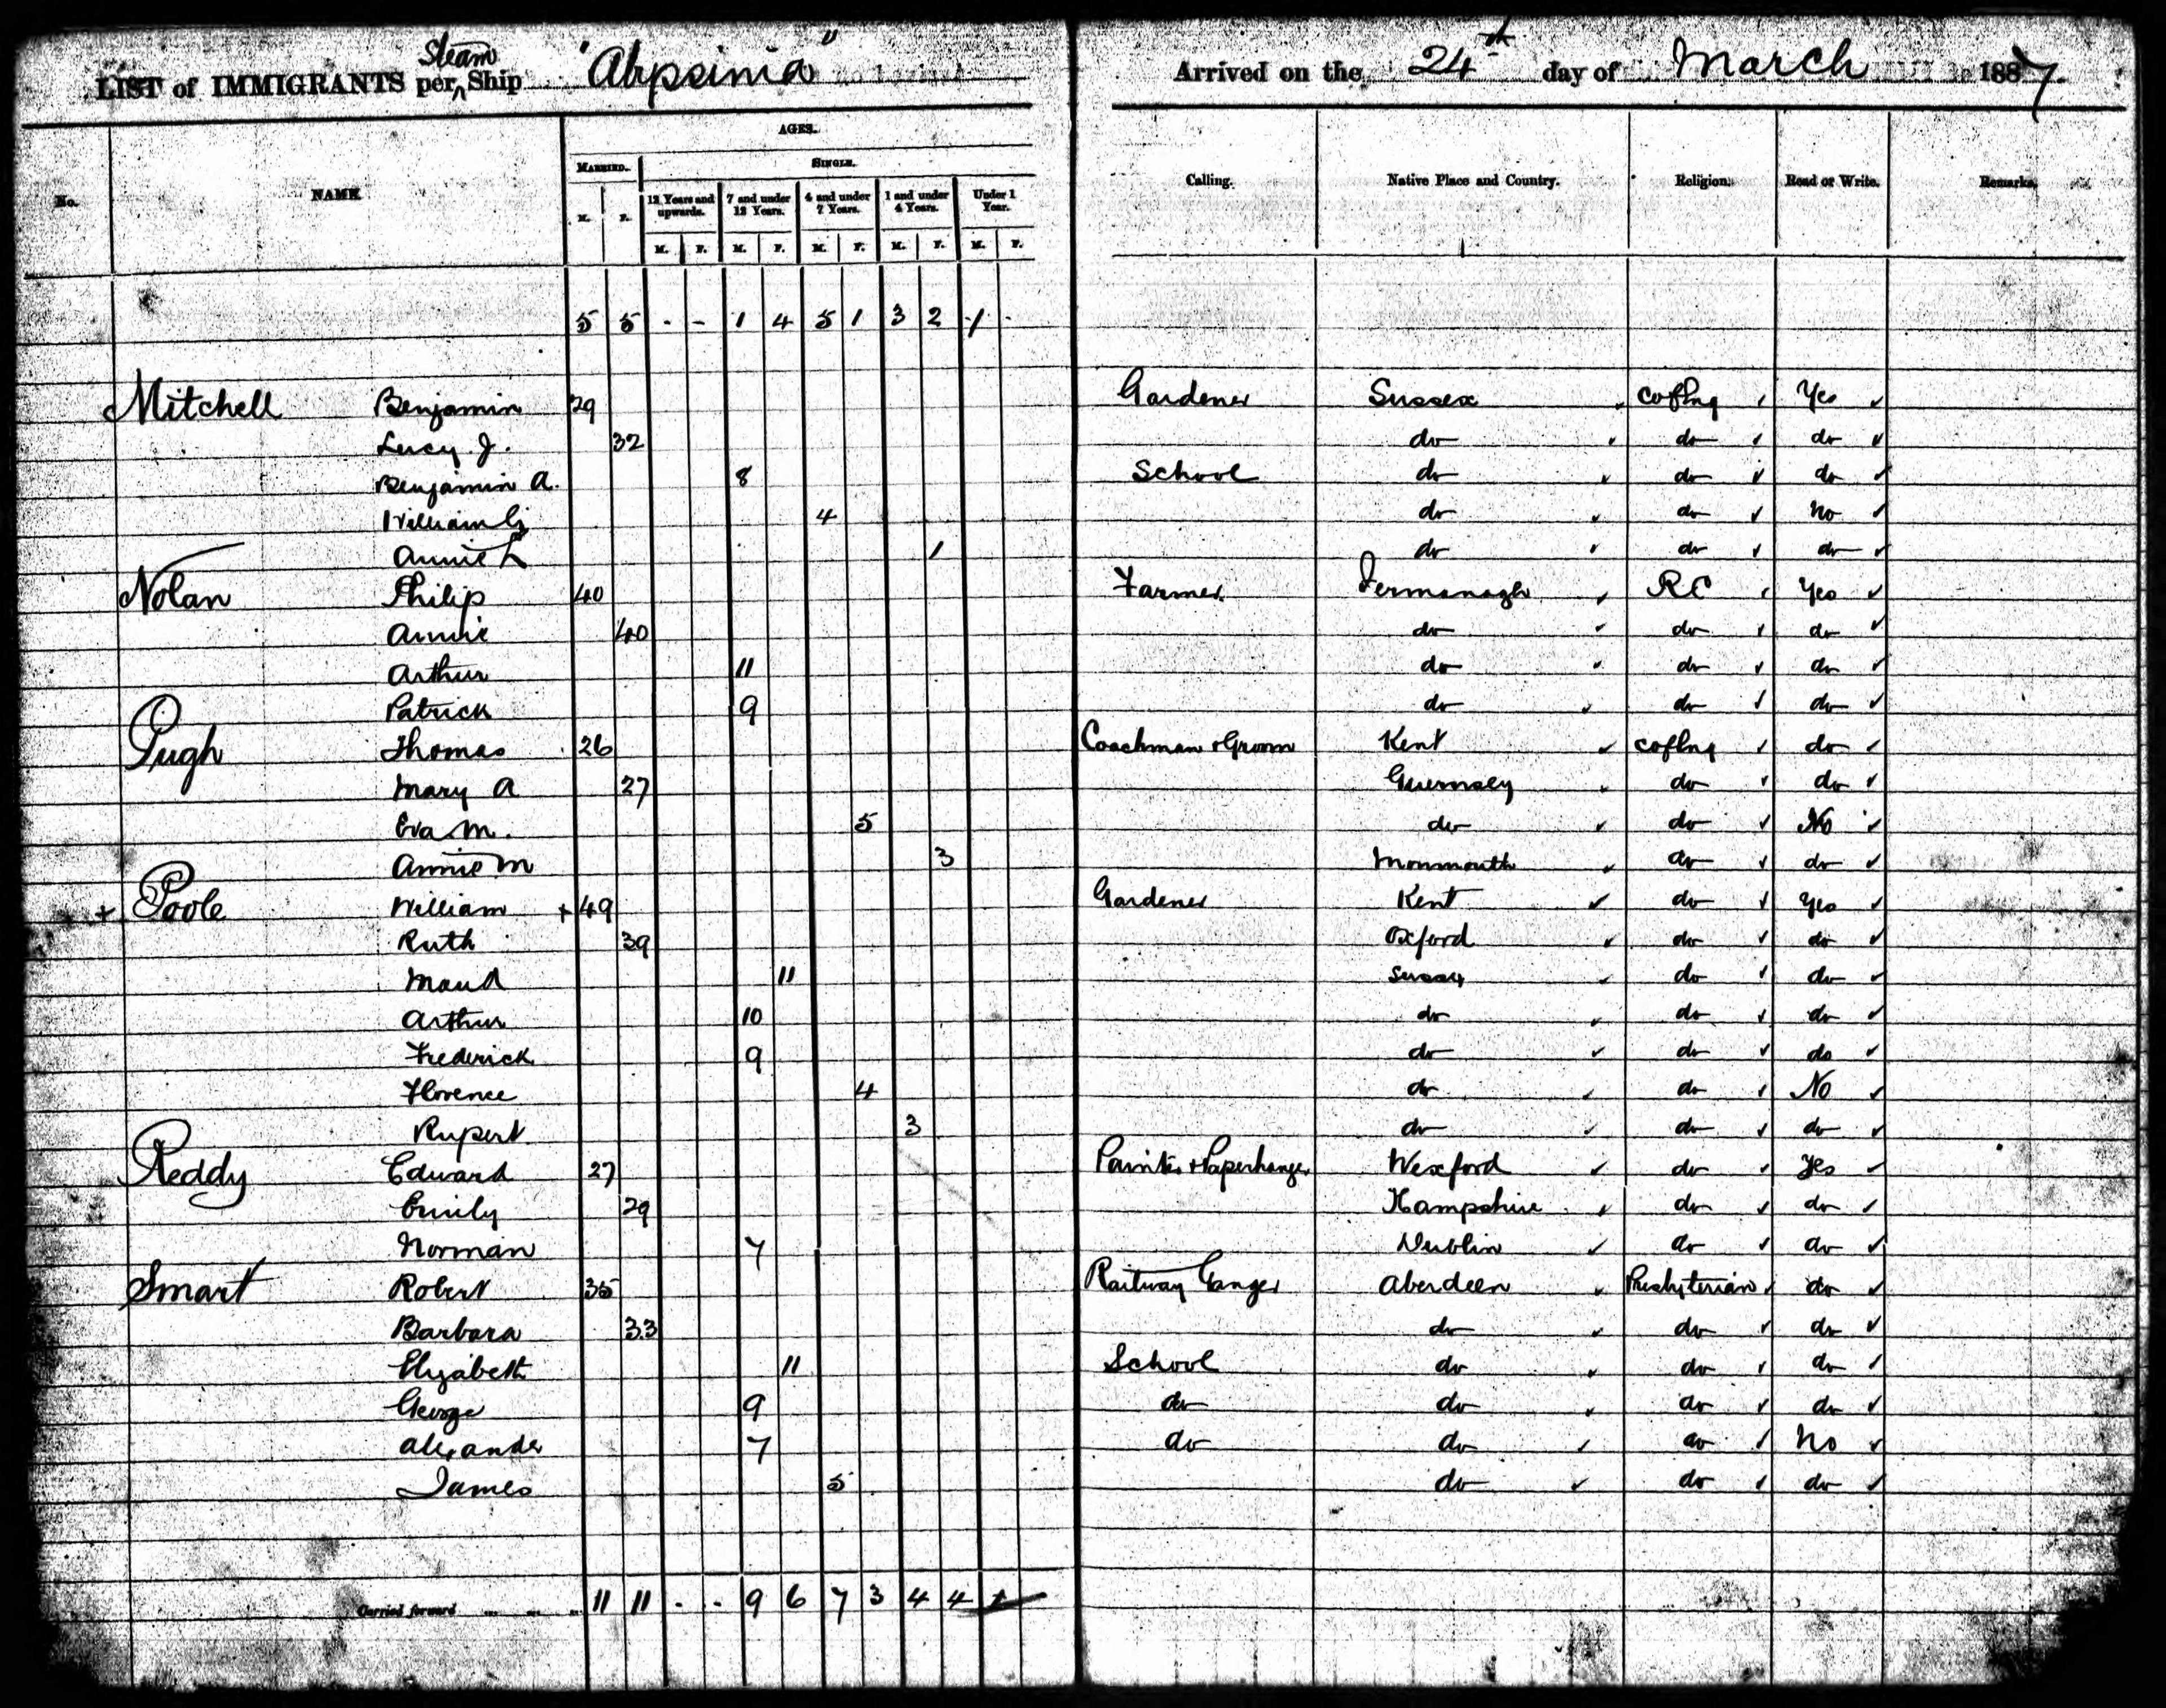 Old immigration list showing the arrival of the Smart family